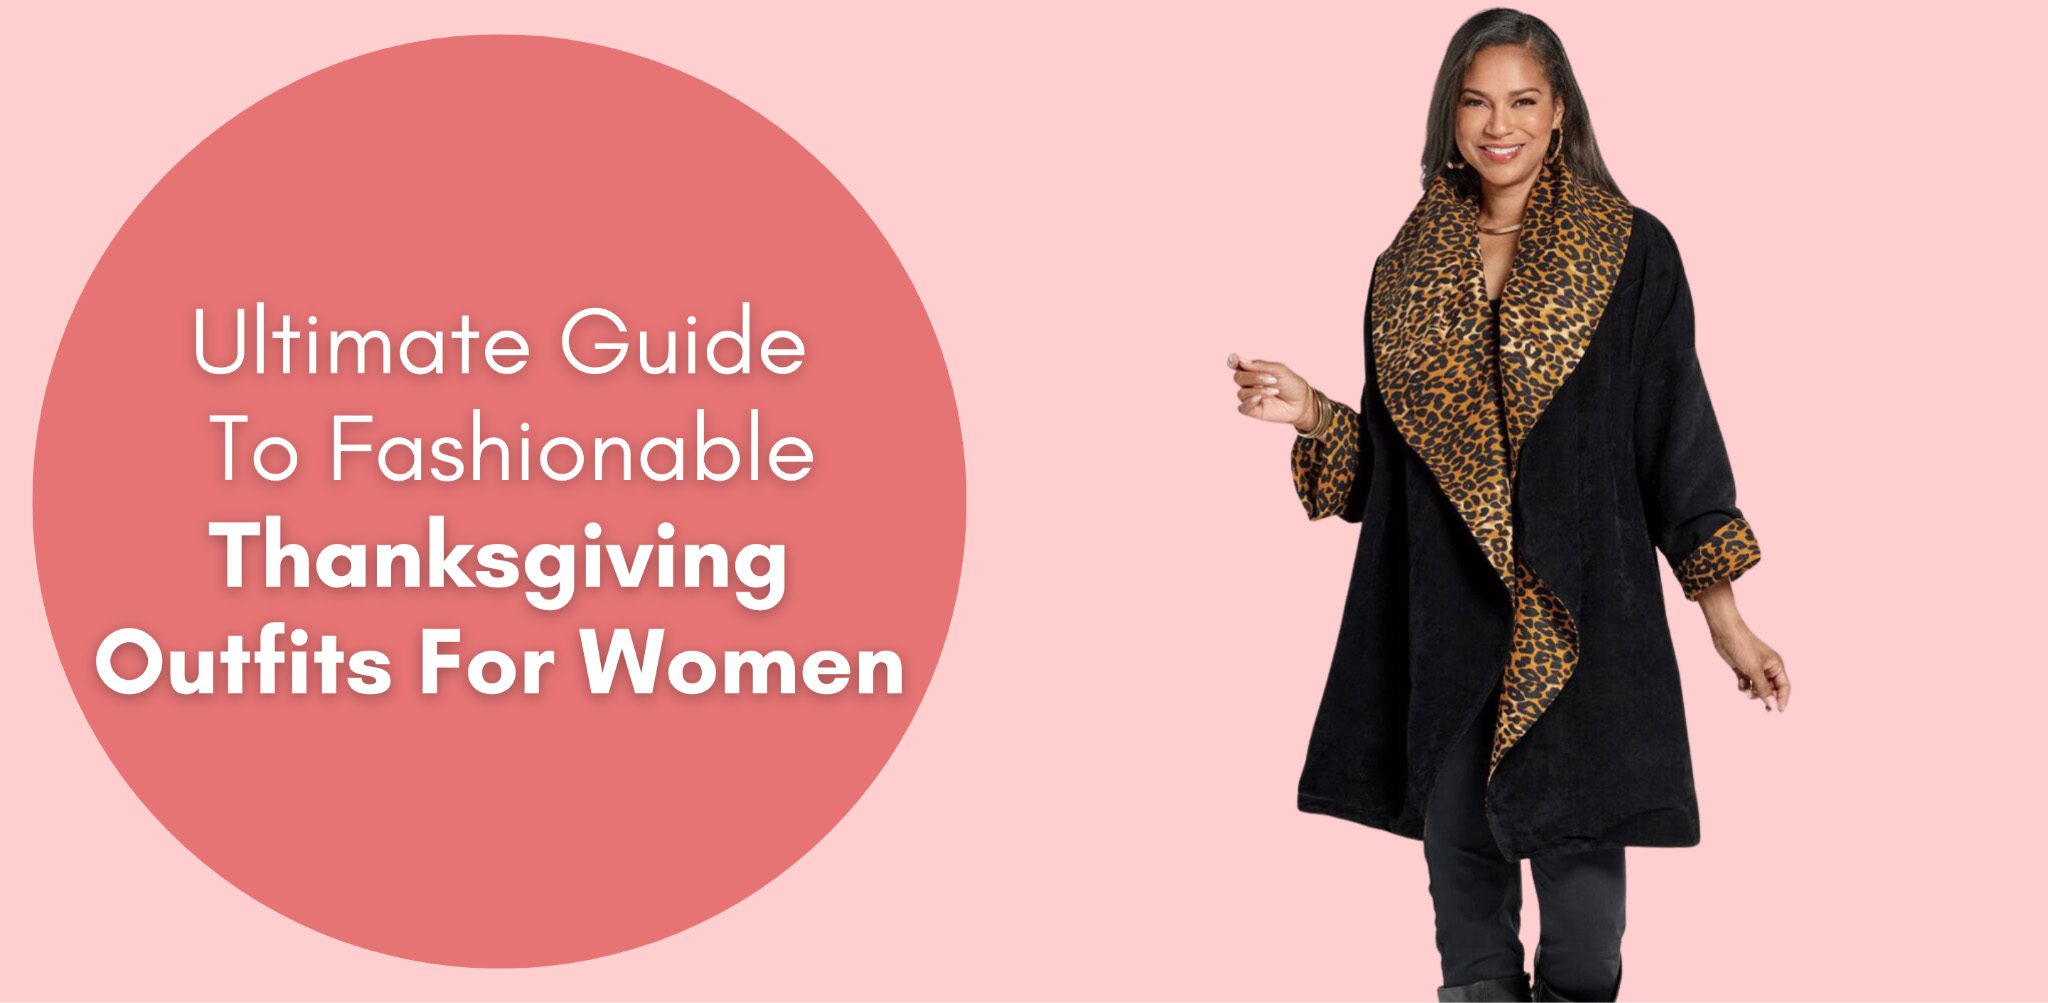 Ultimate Guide To Fashionable Thanksgiving Outfits For Women